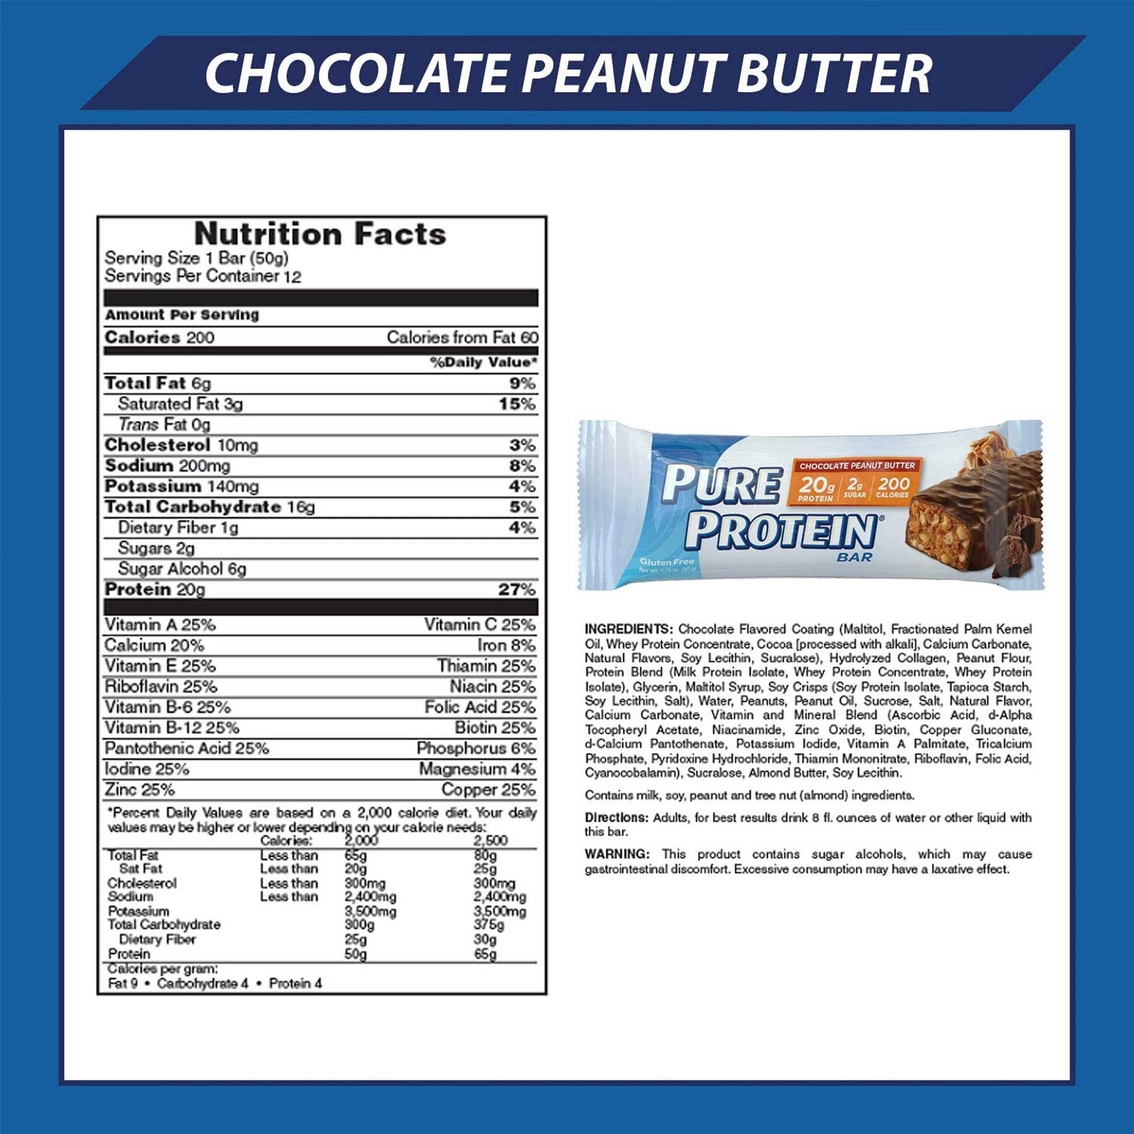 Pure Protein 50g Chocolate Peanut Butter Bar 6 Pk. - Image 2 of 2